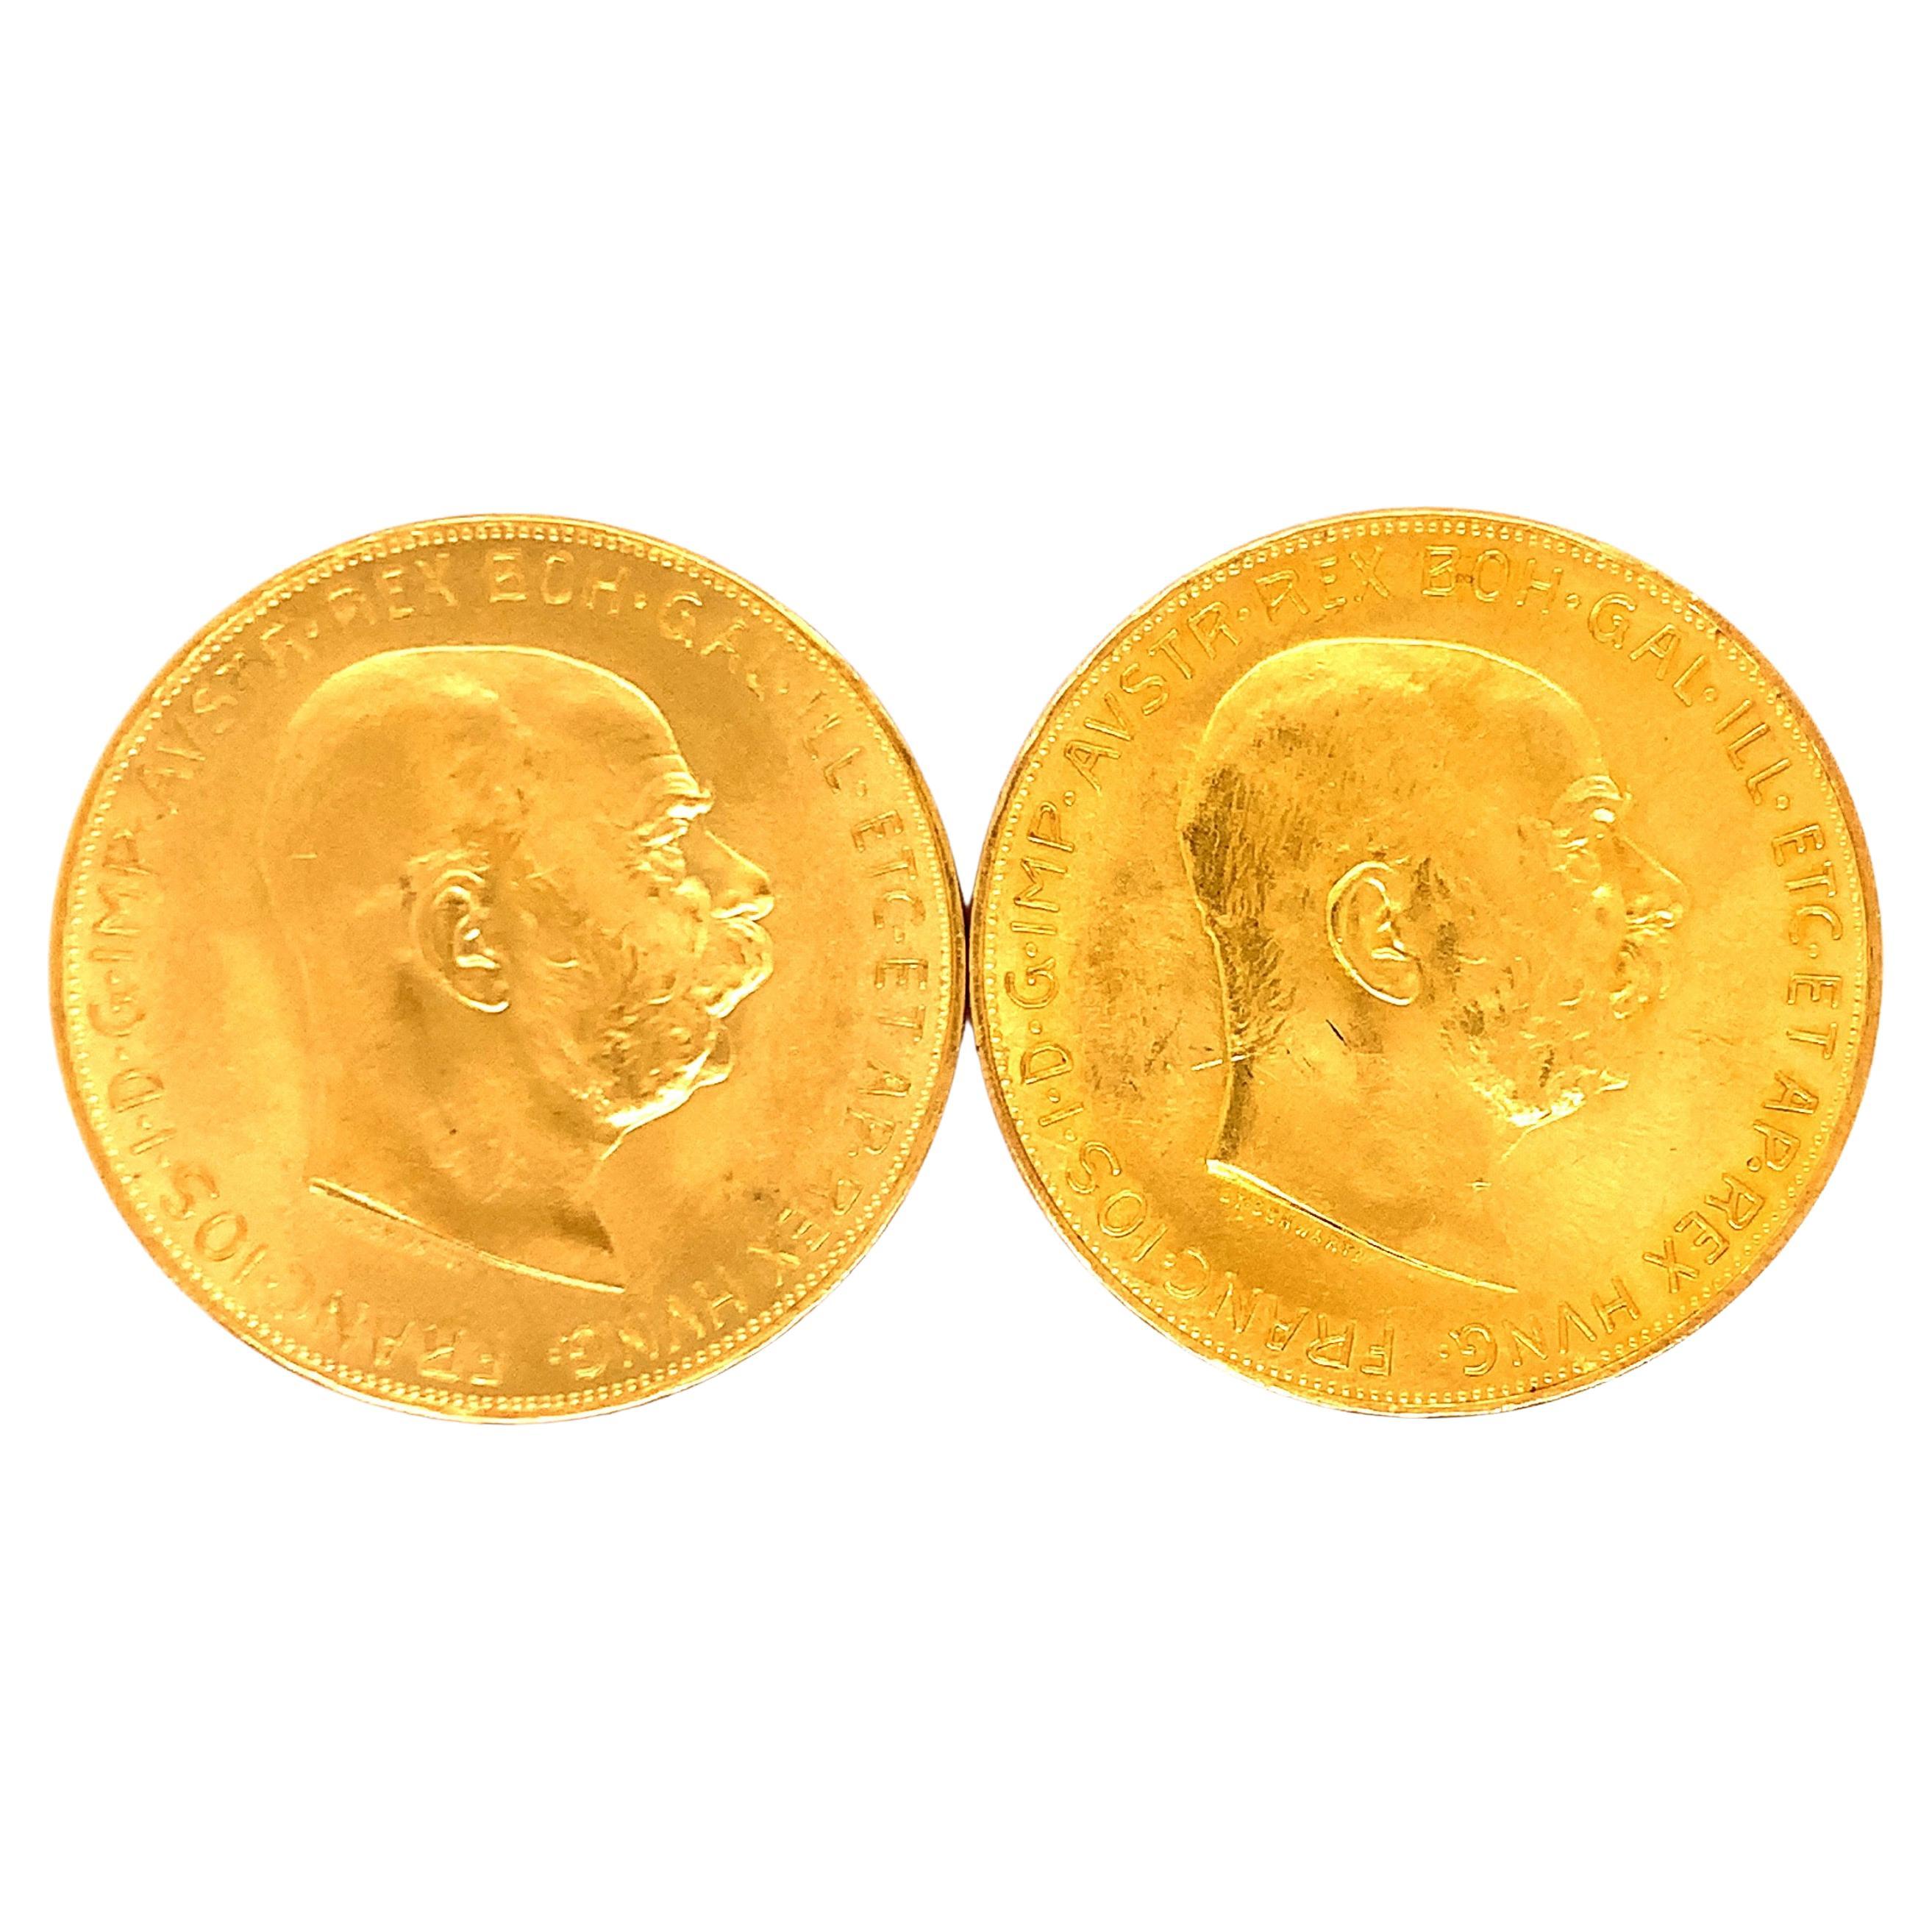 Two 100 Gold Austrian Corona from 1915